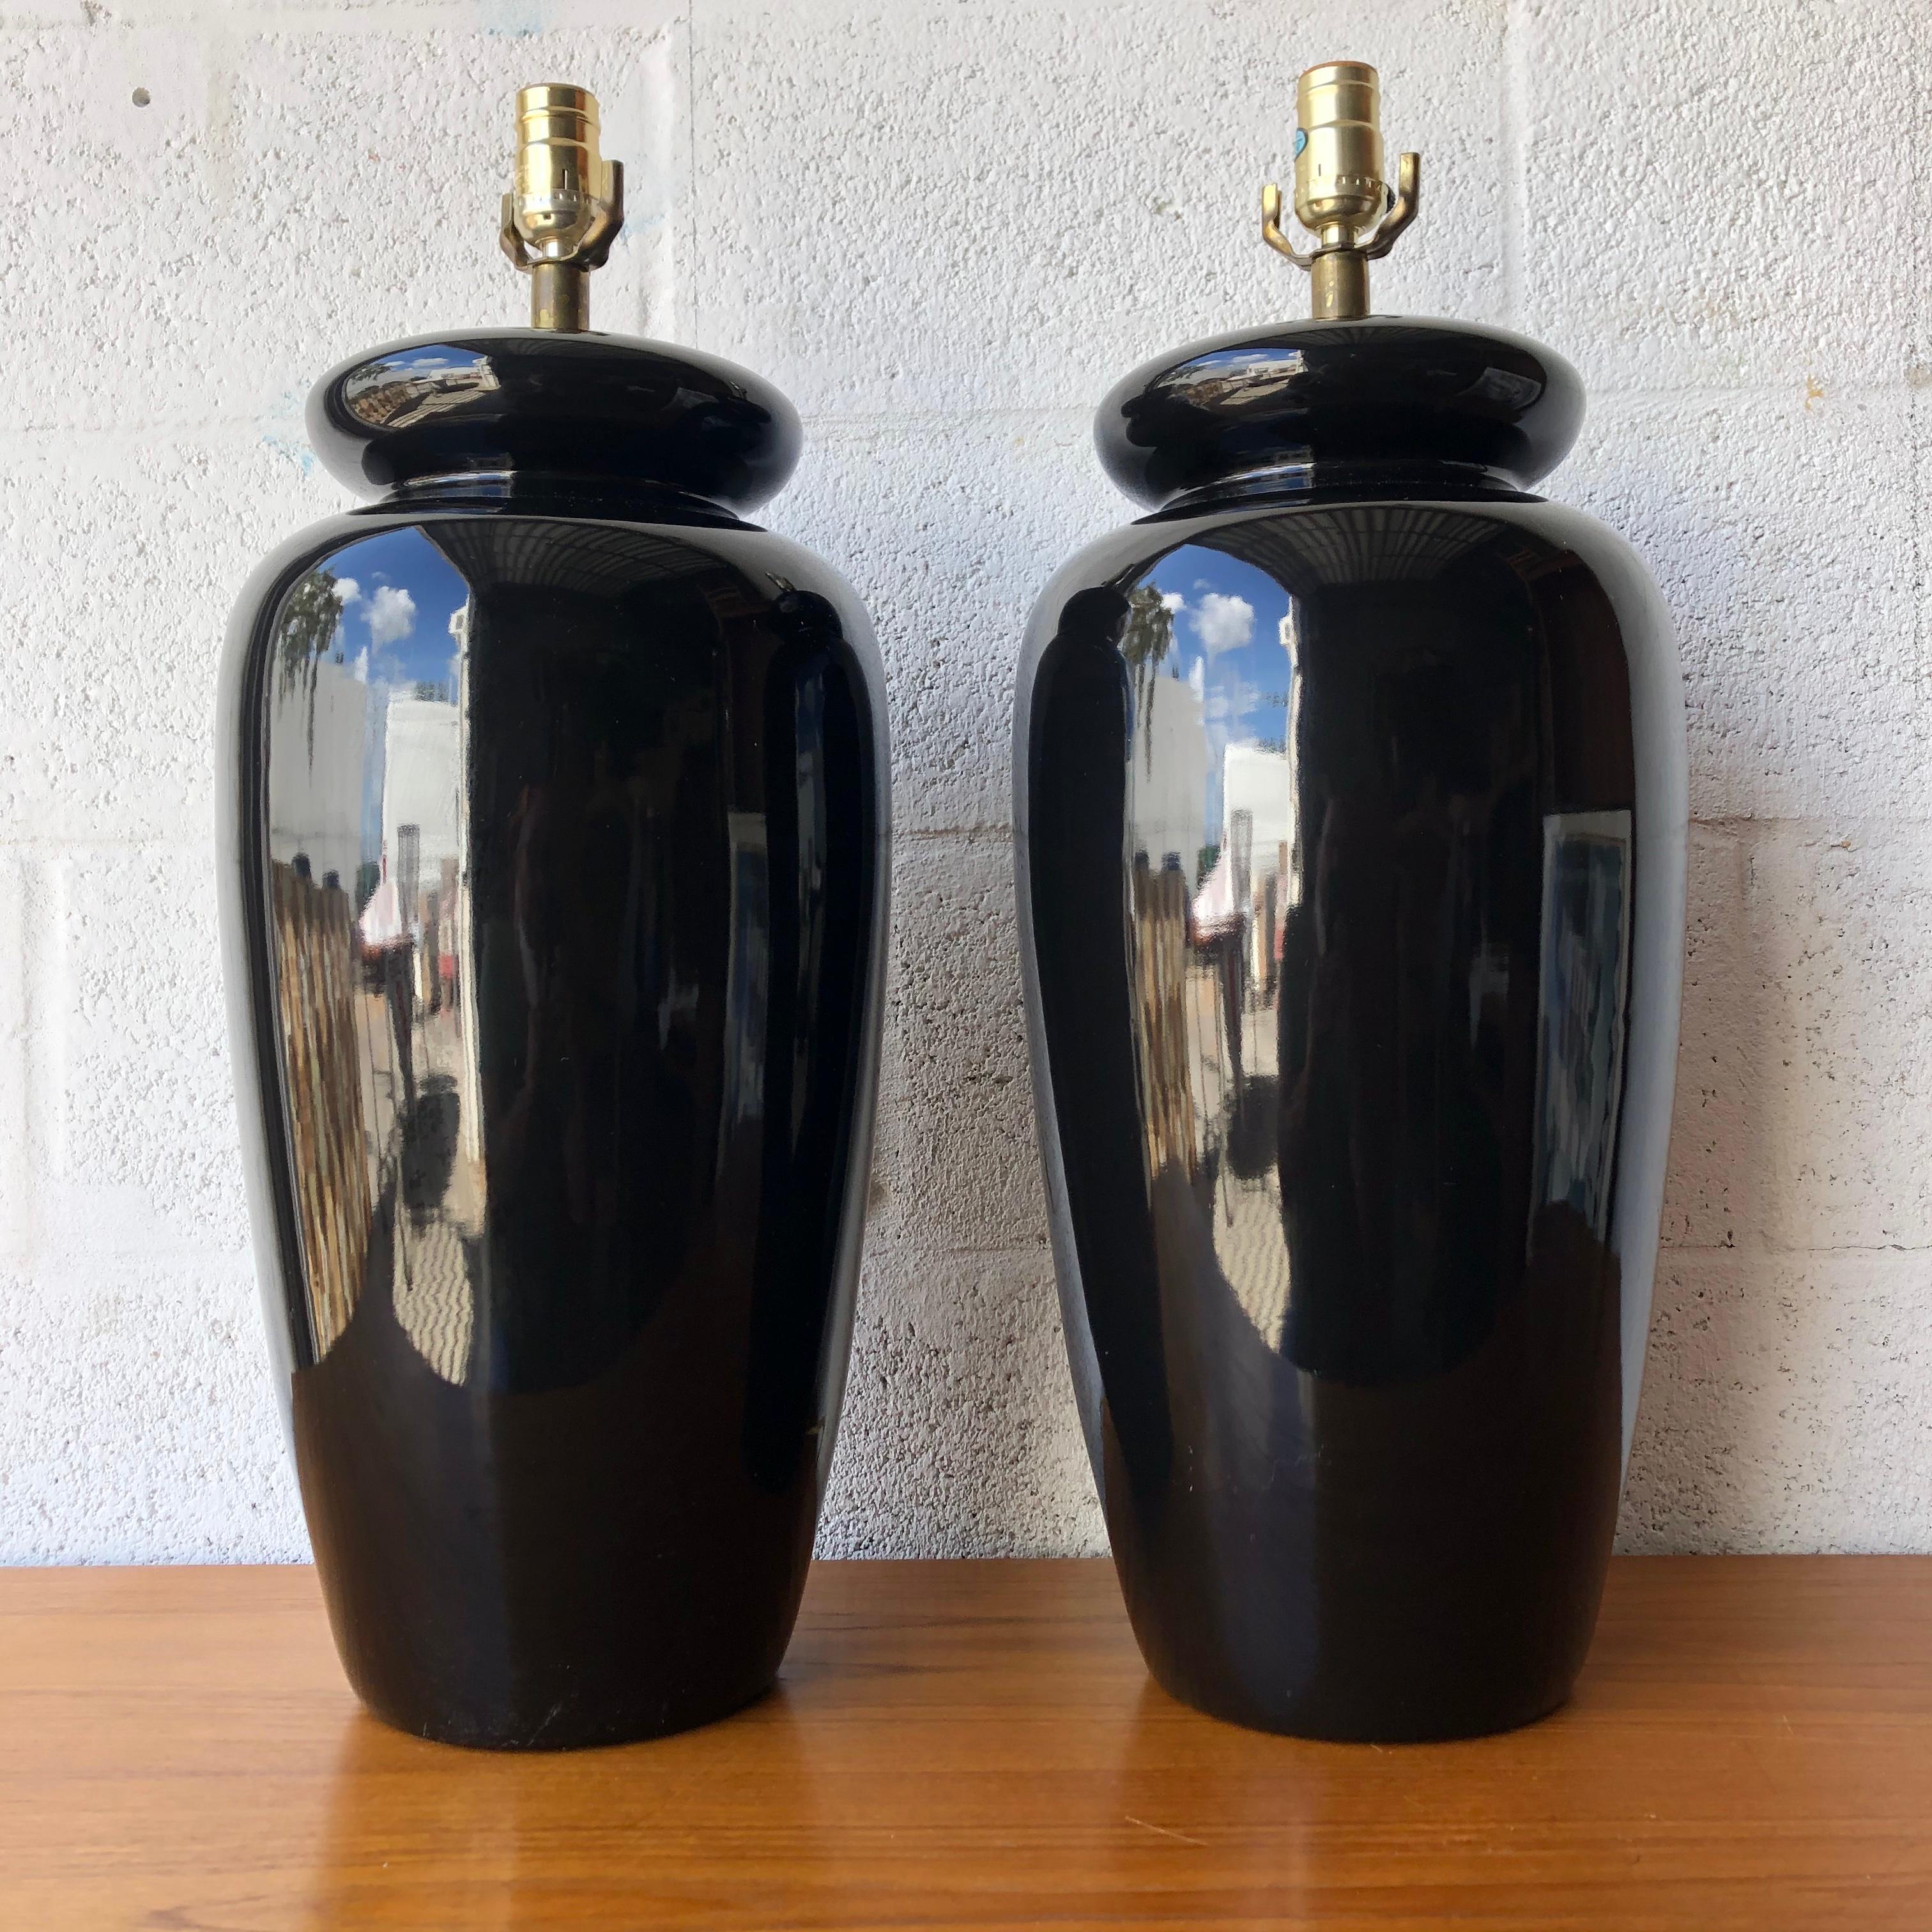 Vintage Large Scale Post Modern Art Deco Inspired Ceramic Table Lamps. C. 1980s 
Feature a black glossy ceramic finish and clean rounded lines very commonly seen on the late 70s and mid 80s. art deco revival style.
In excellent vintage condition